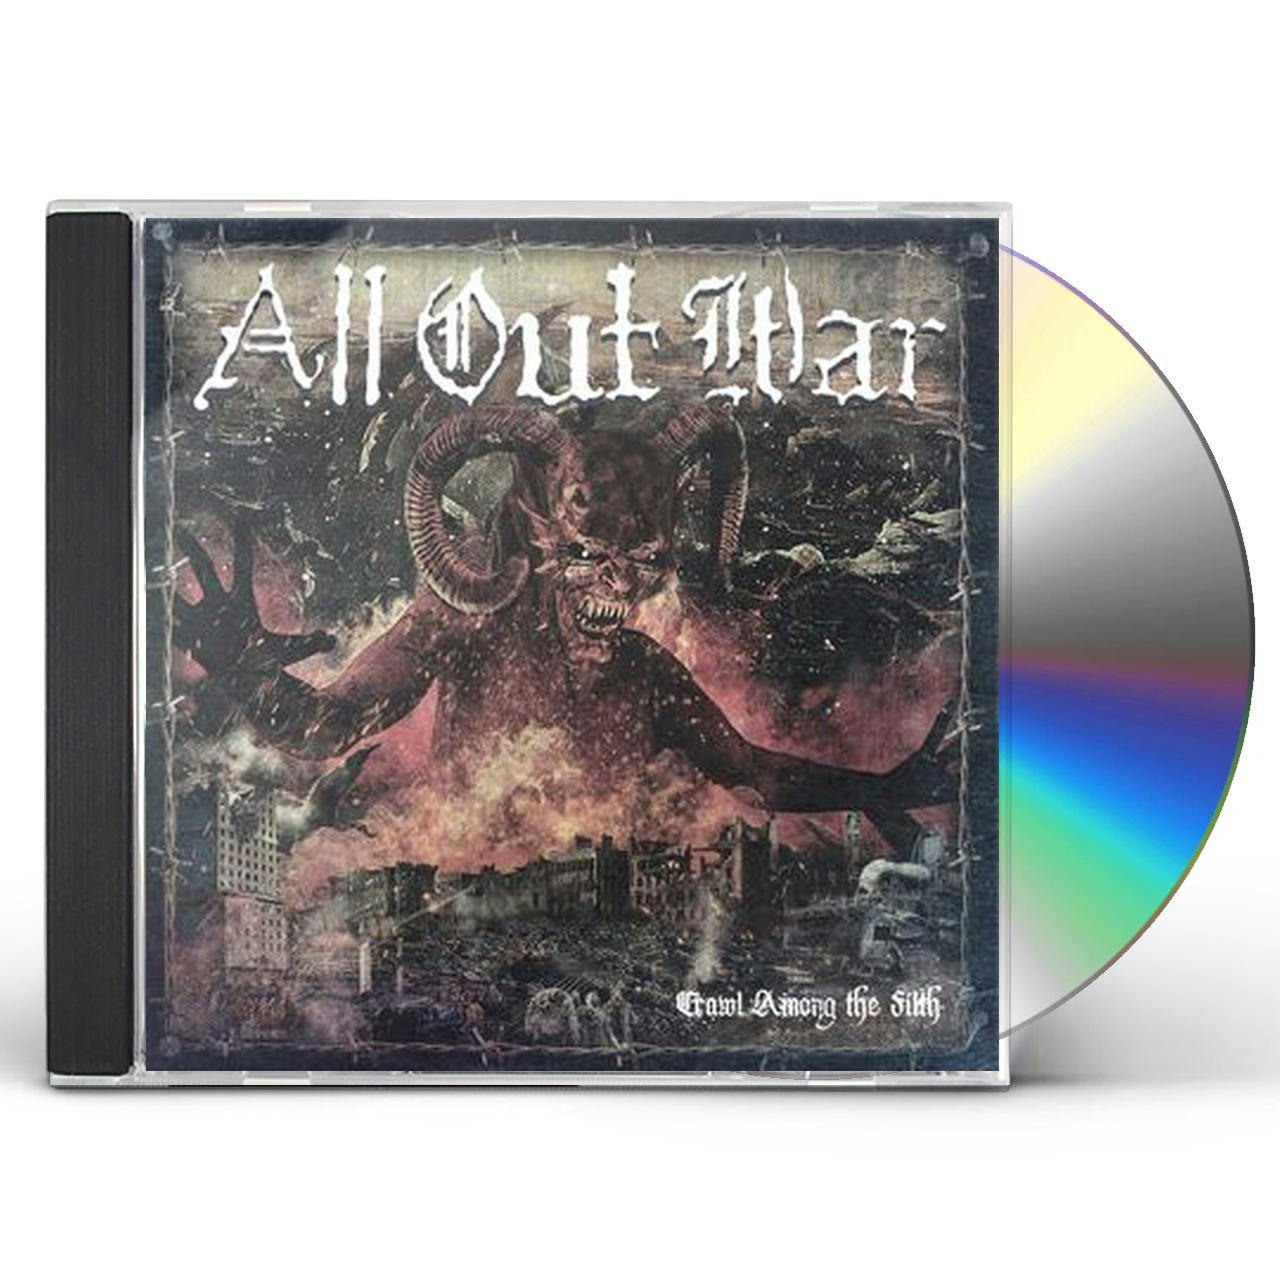 FILTH　CRAWL　All　War　THE　Out　AMONG　CD